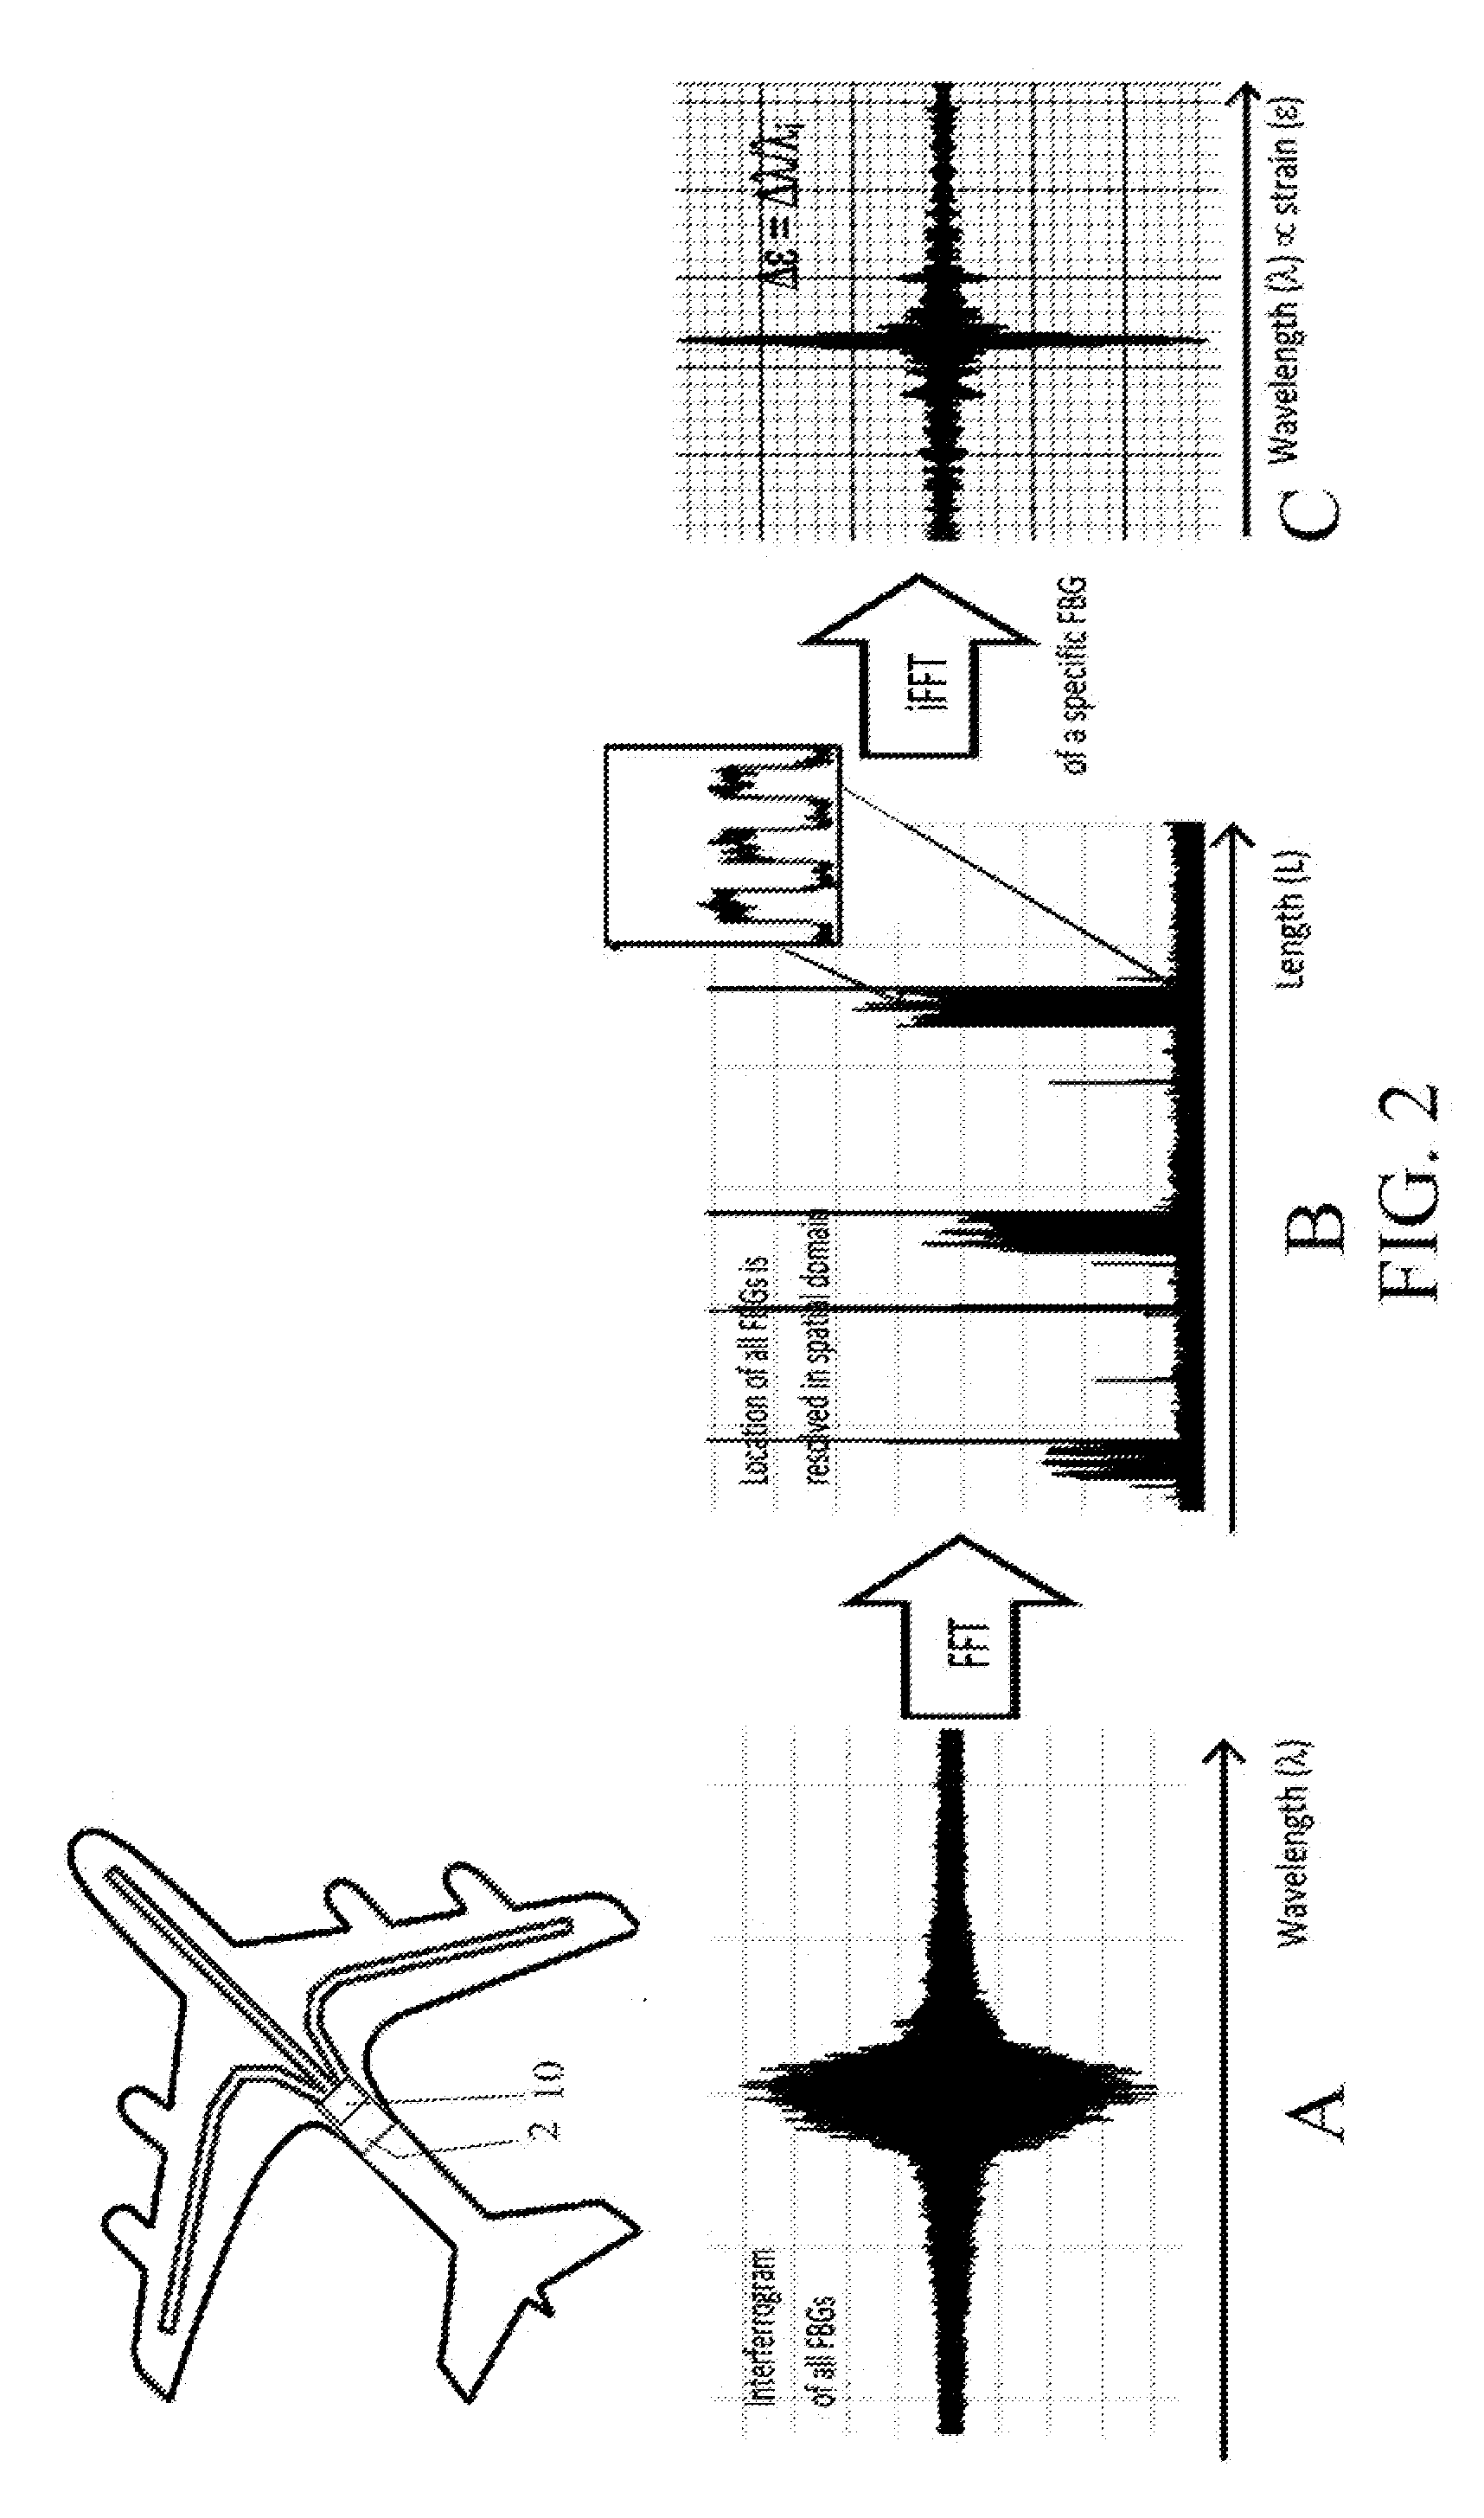 Method and apparatus of multiplexing and acquiring data from multiple optical fibers using a single data channel of an optical frequency-domain reflectometry (OFDR) system